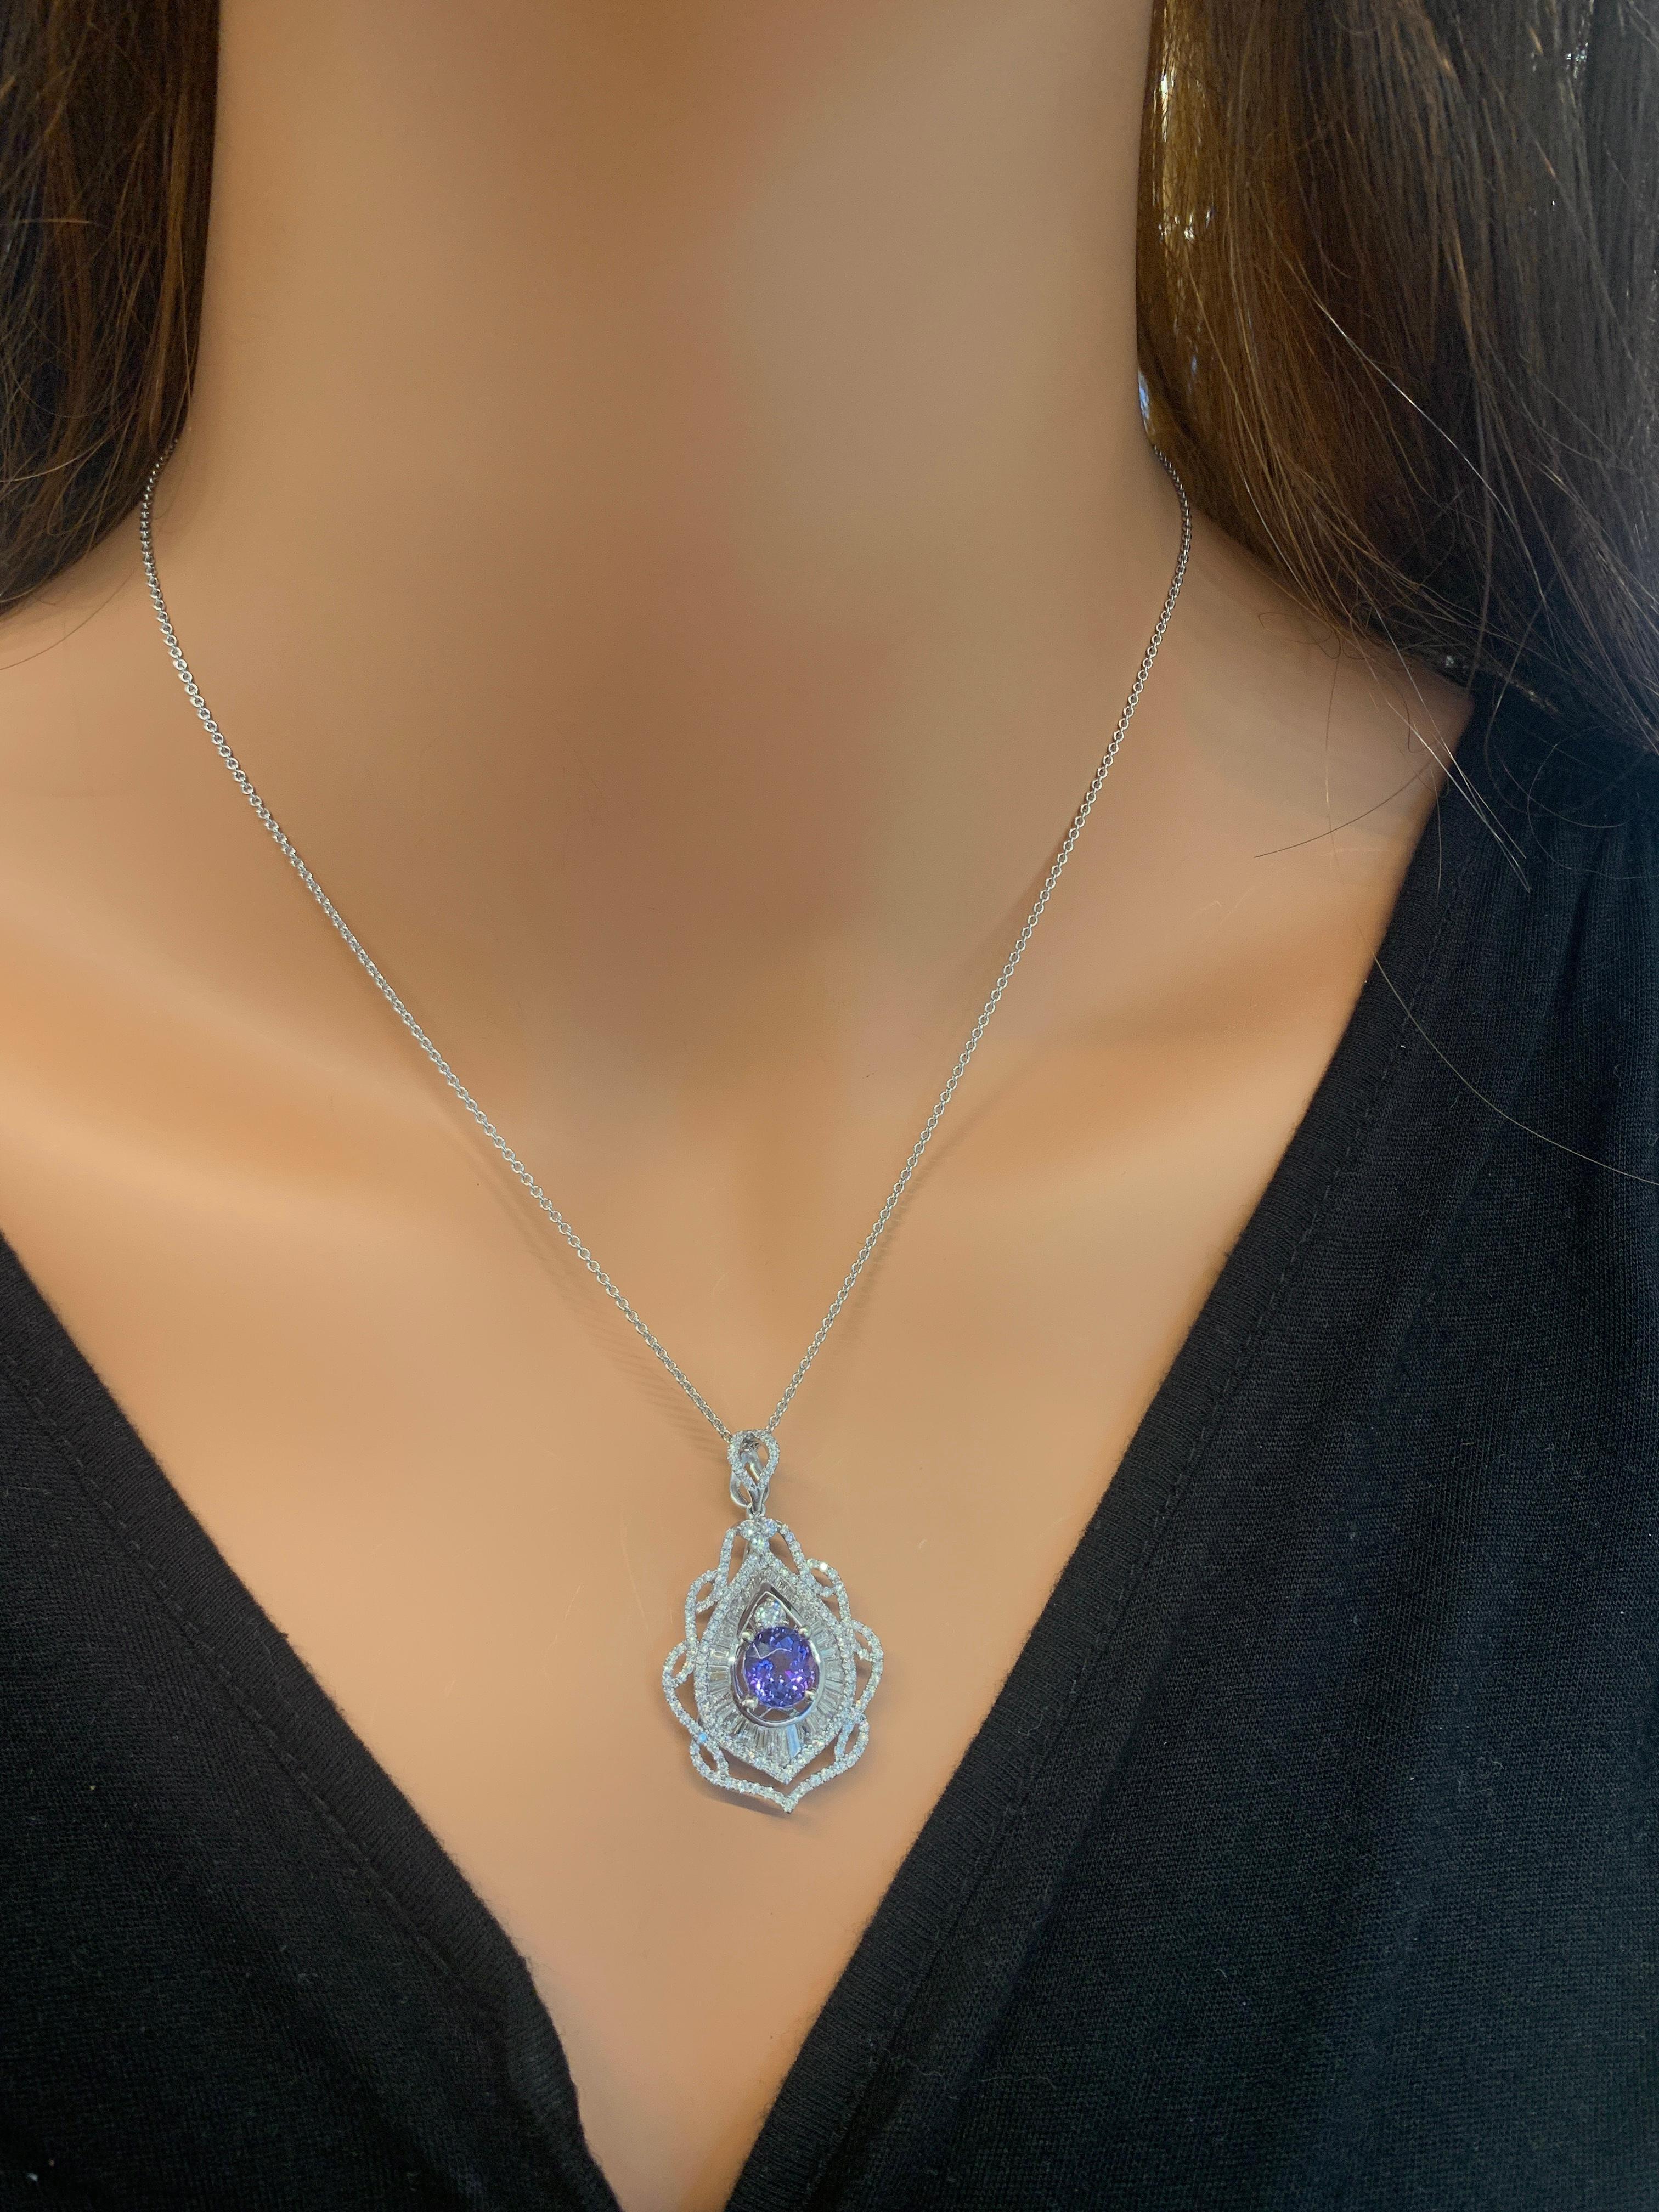 Tanzanite is the birthstone for December, making this gorgeous, brightly polished 18k white gold drop pendant an unforgettable gift to give. A round cut 6.8X7.4MM tanzanite sits nestled in the center displaying an intense bluish-purple color. A